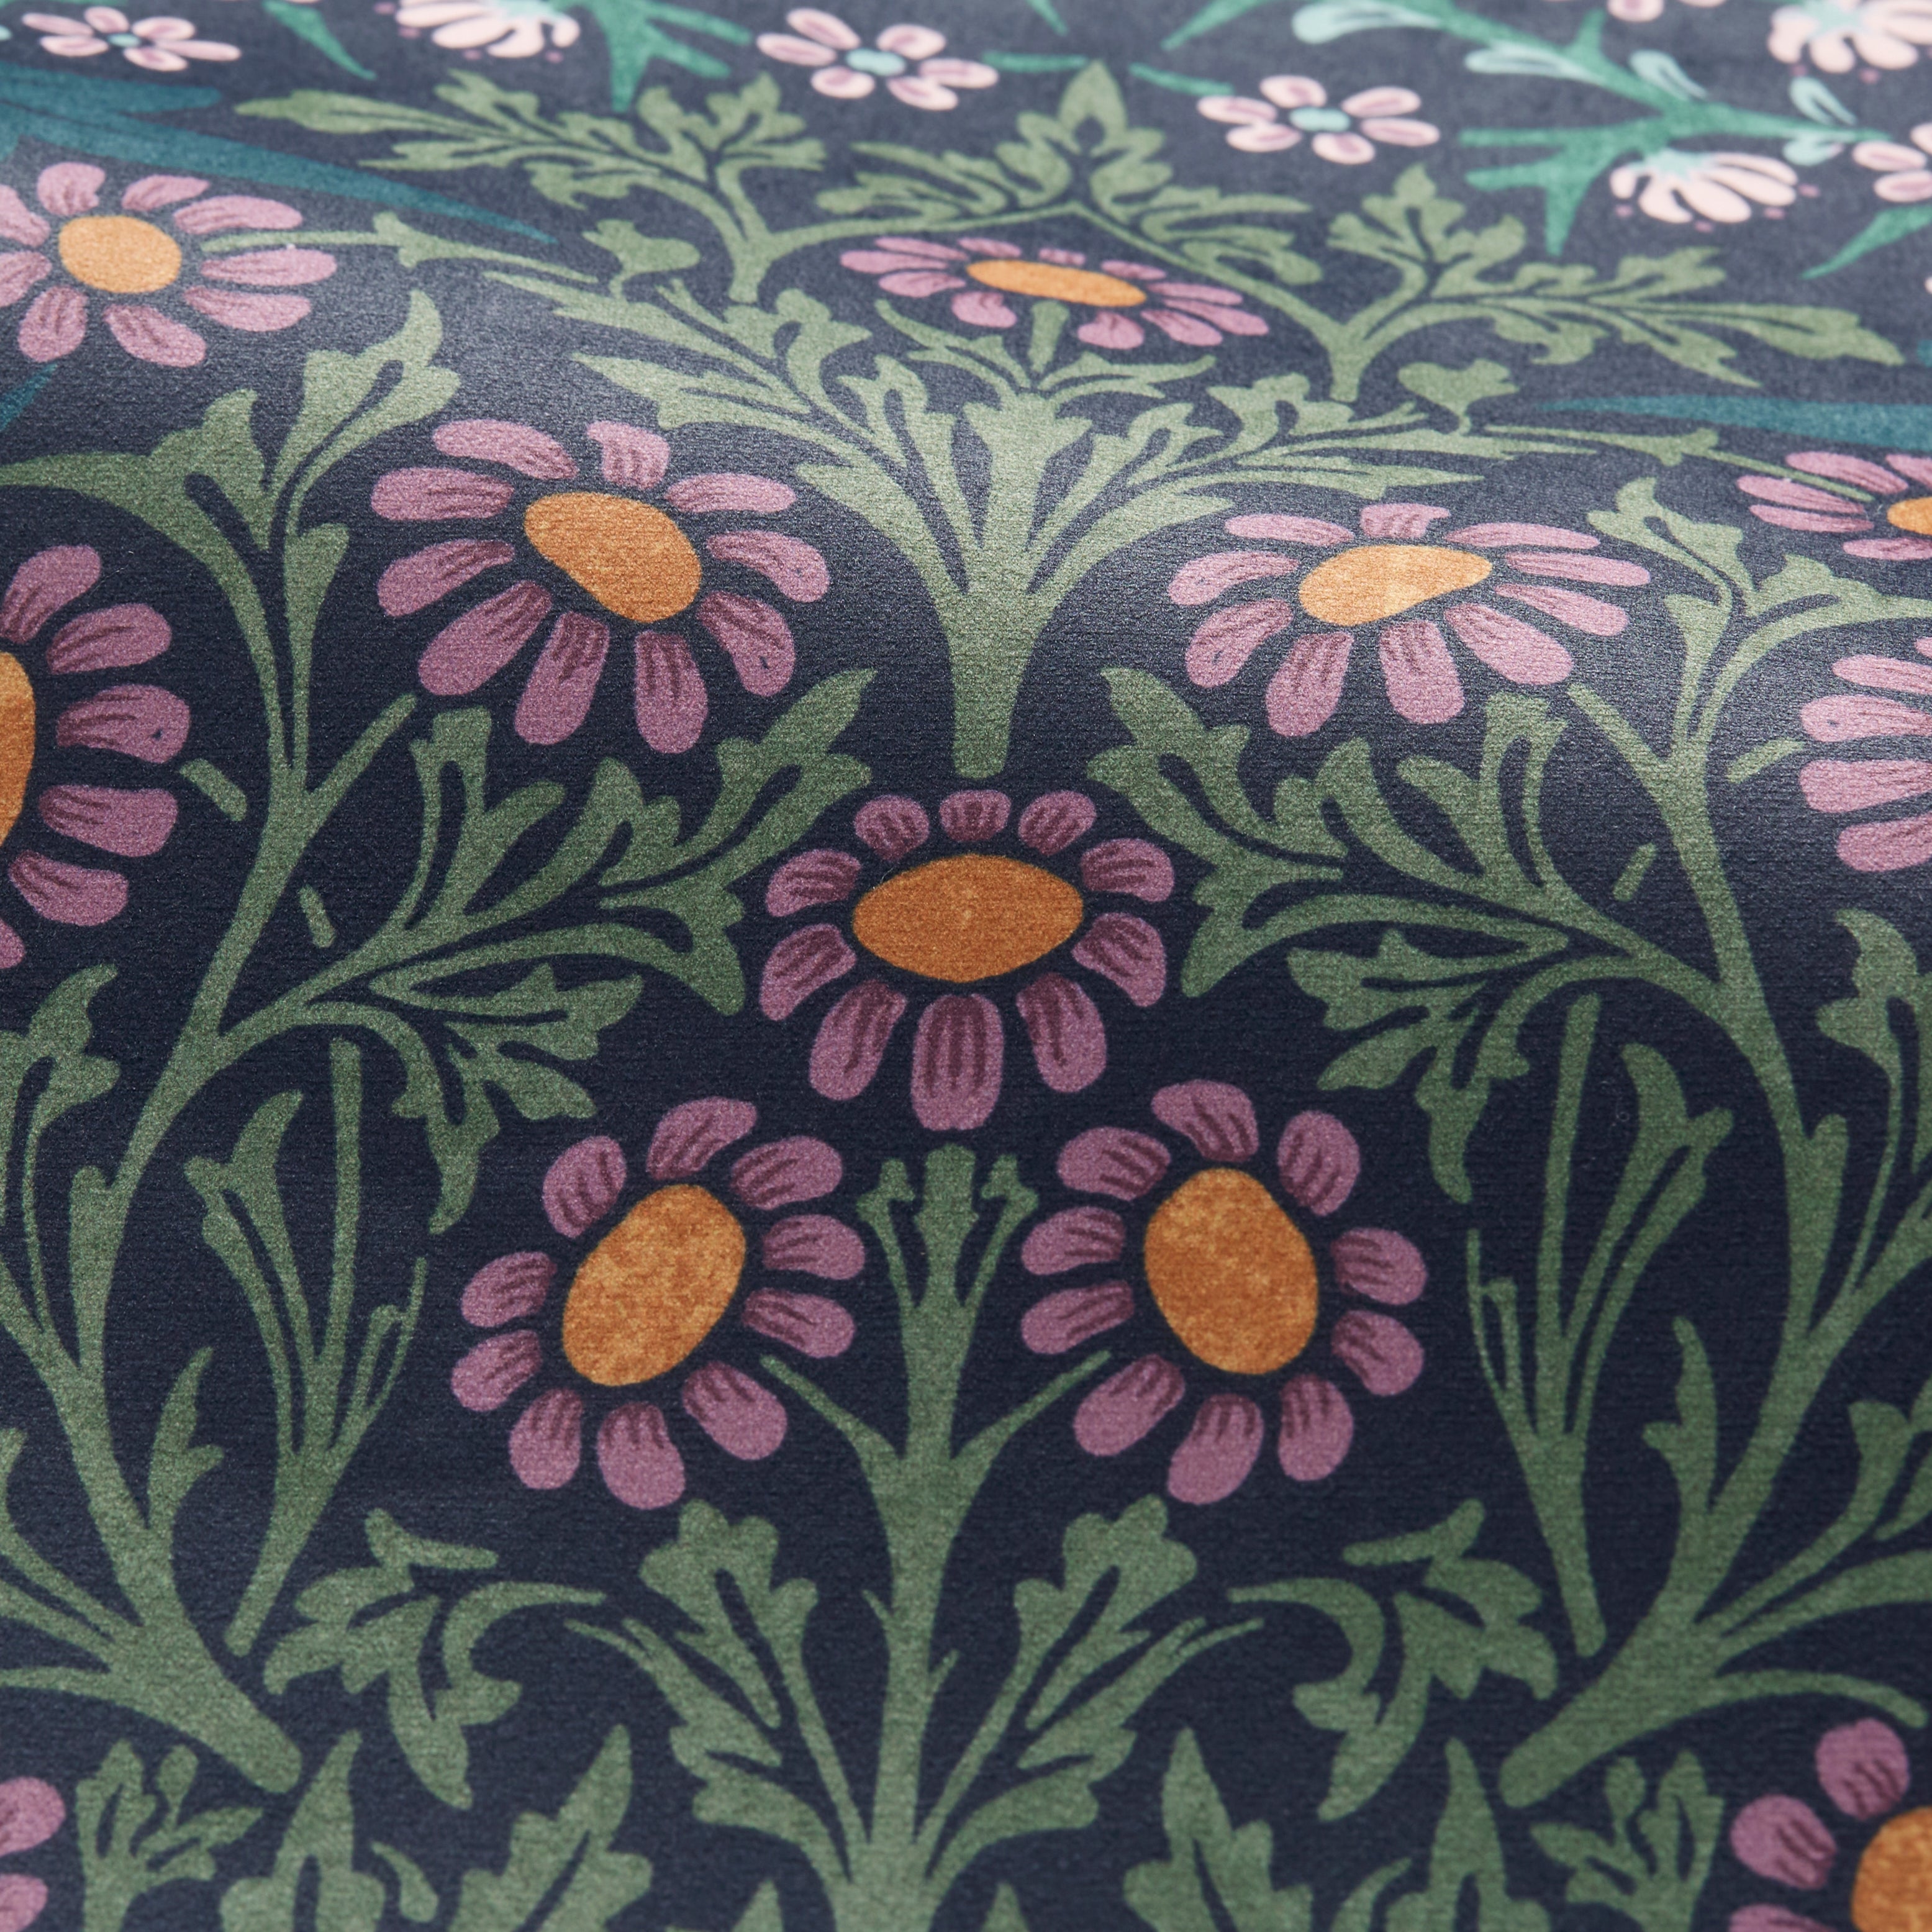 William Morris At Home Blackthorn Made to Measure Fabric Sample Blackthorn Dewberry